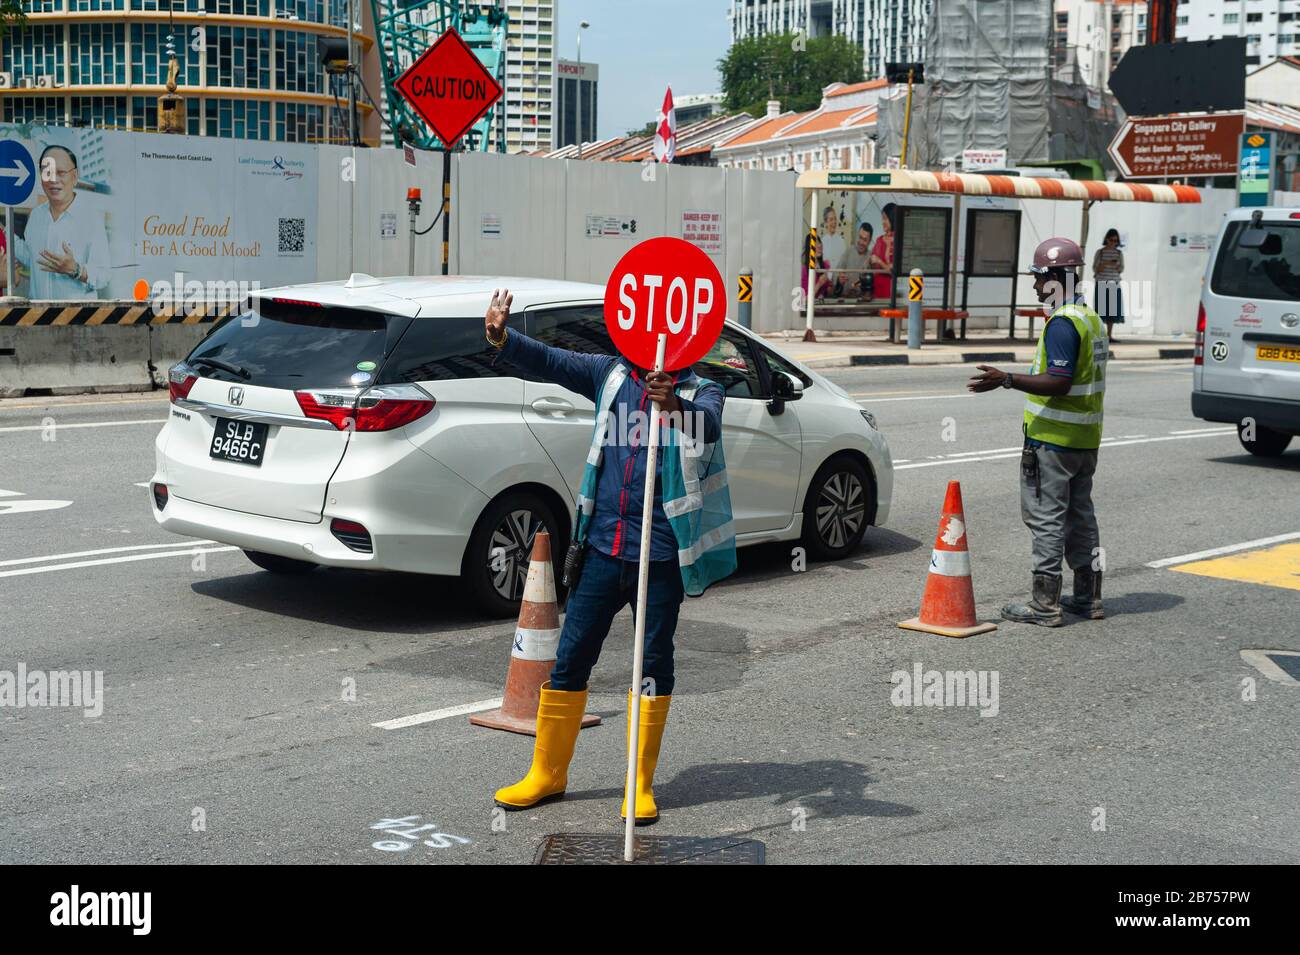 18042018-singapore-republic-of-singapore-asia-a-worker-uses-a-stop-sign-to-control-traffic-at-a-construction-site-in-chinatown-automated-translation-2B757PW.jpg